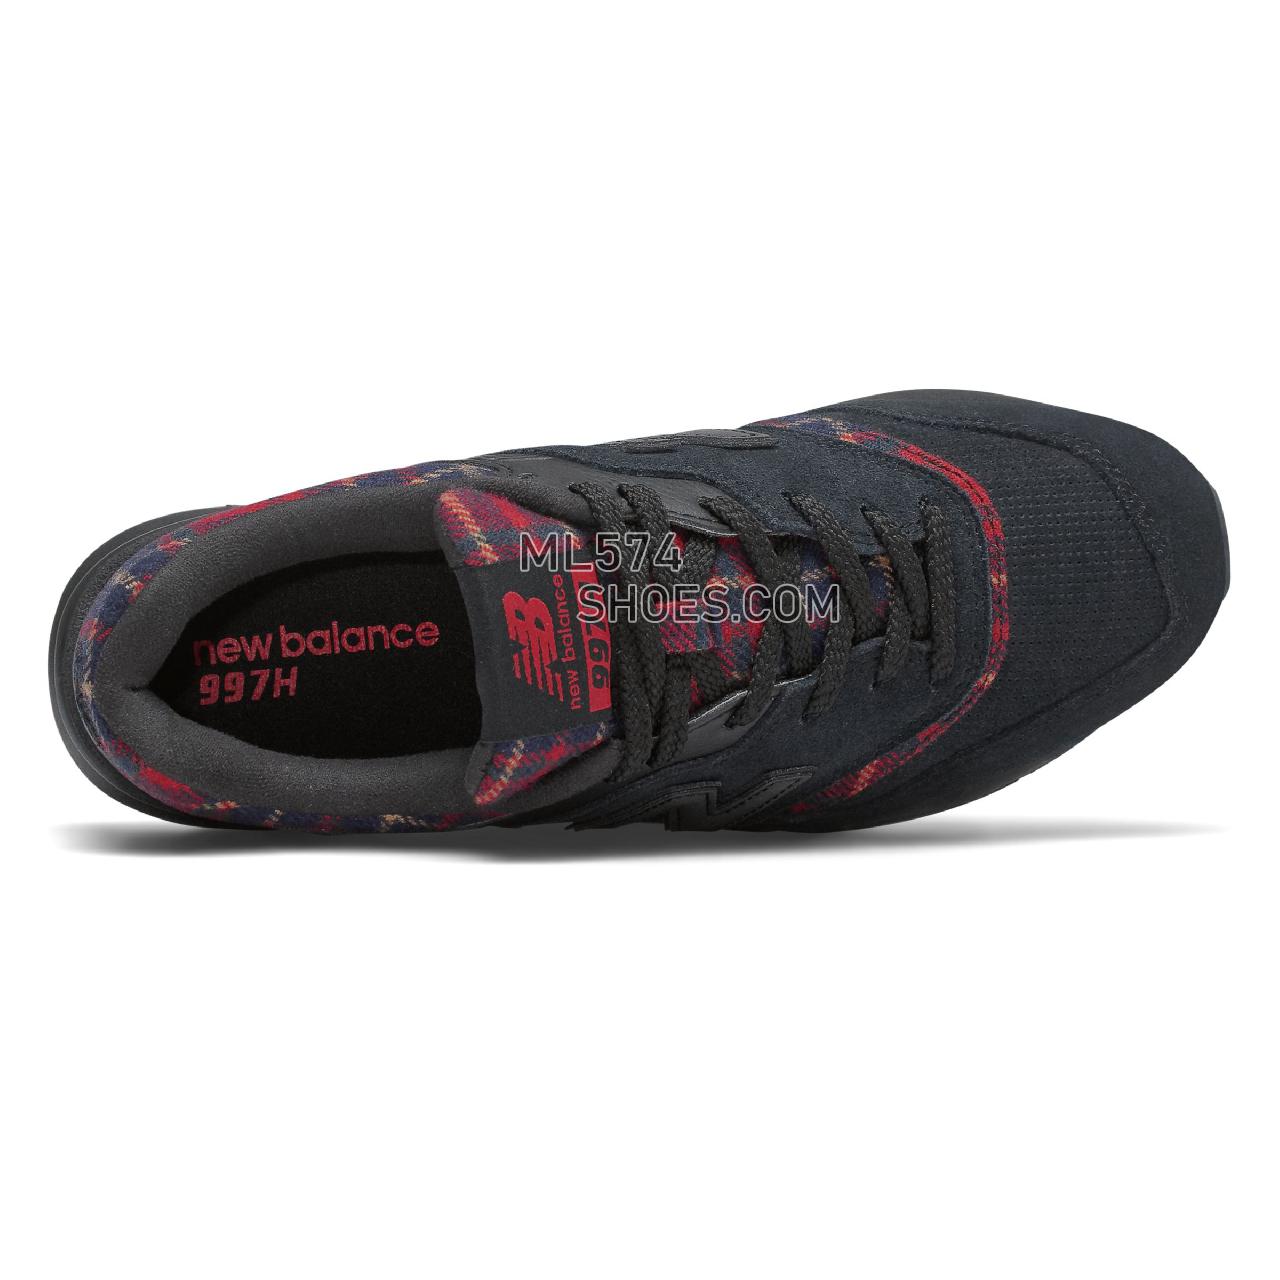 New Balance 997H - Women's Classic Sneakers - Black with Scarlet - CW997HXB